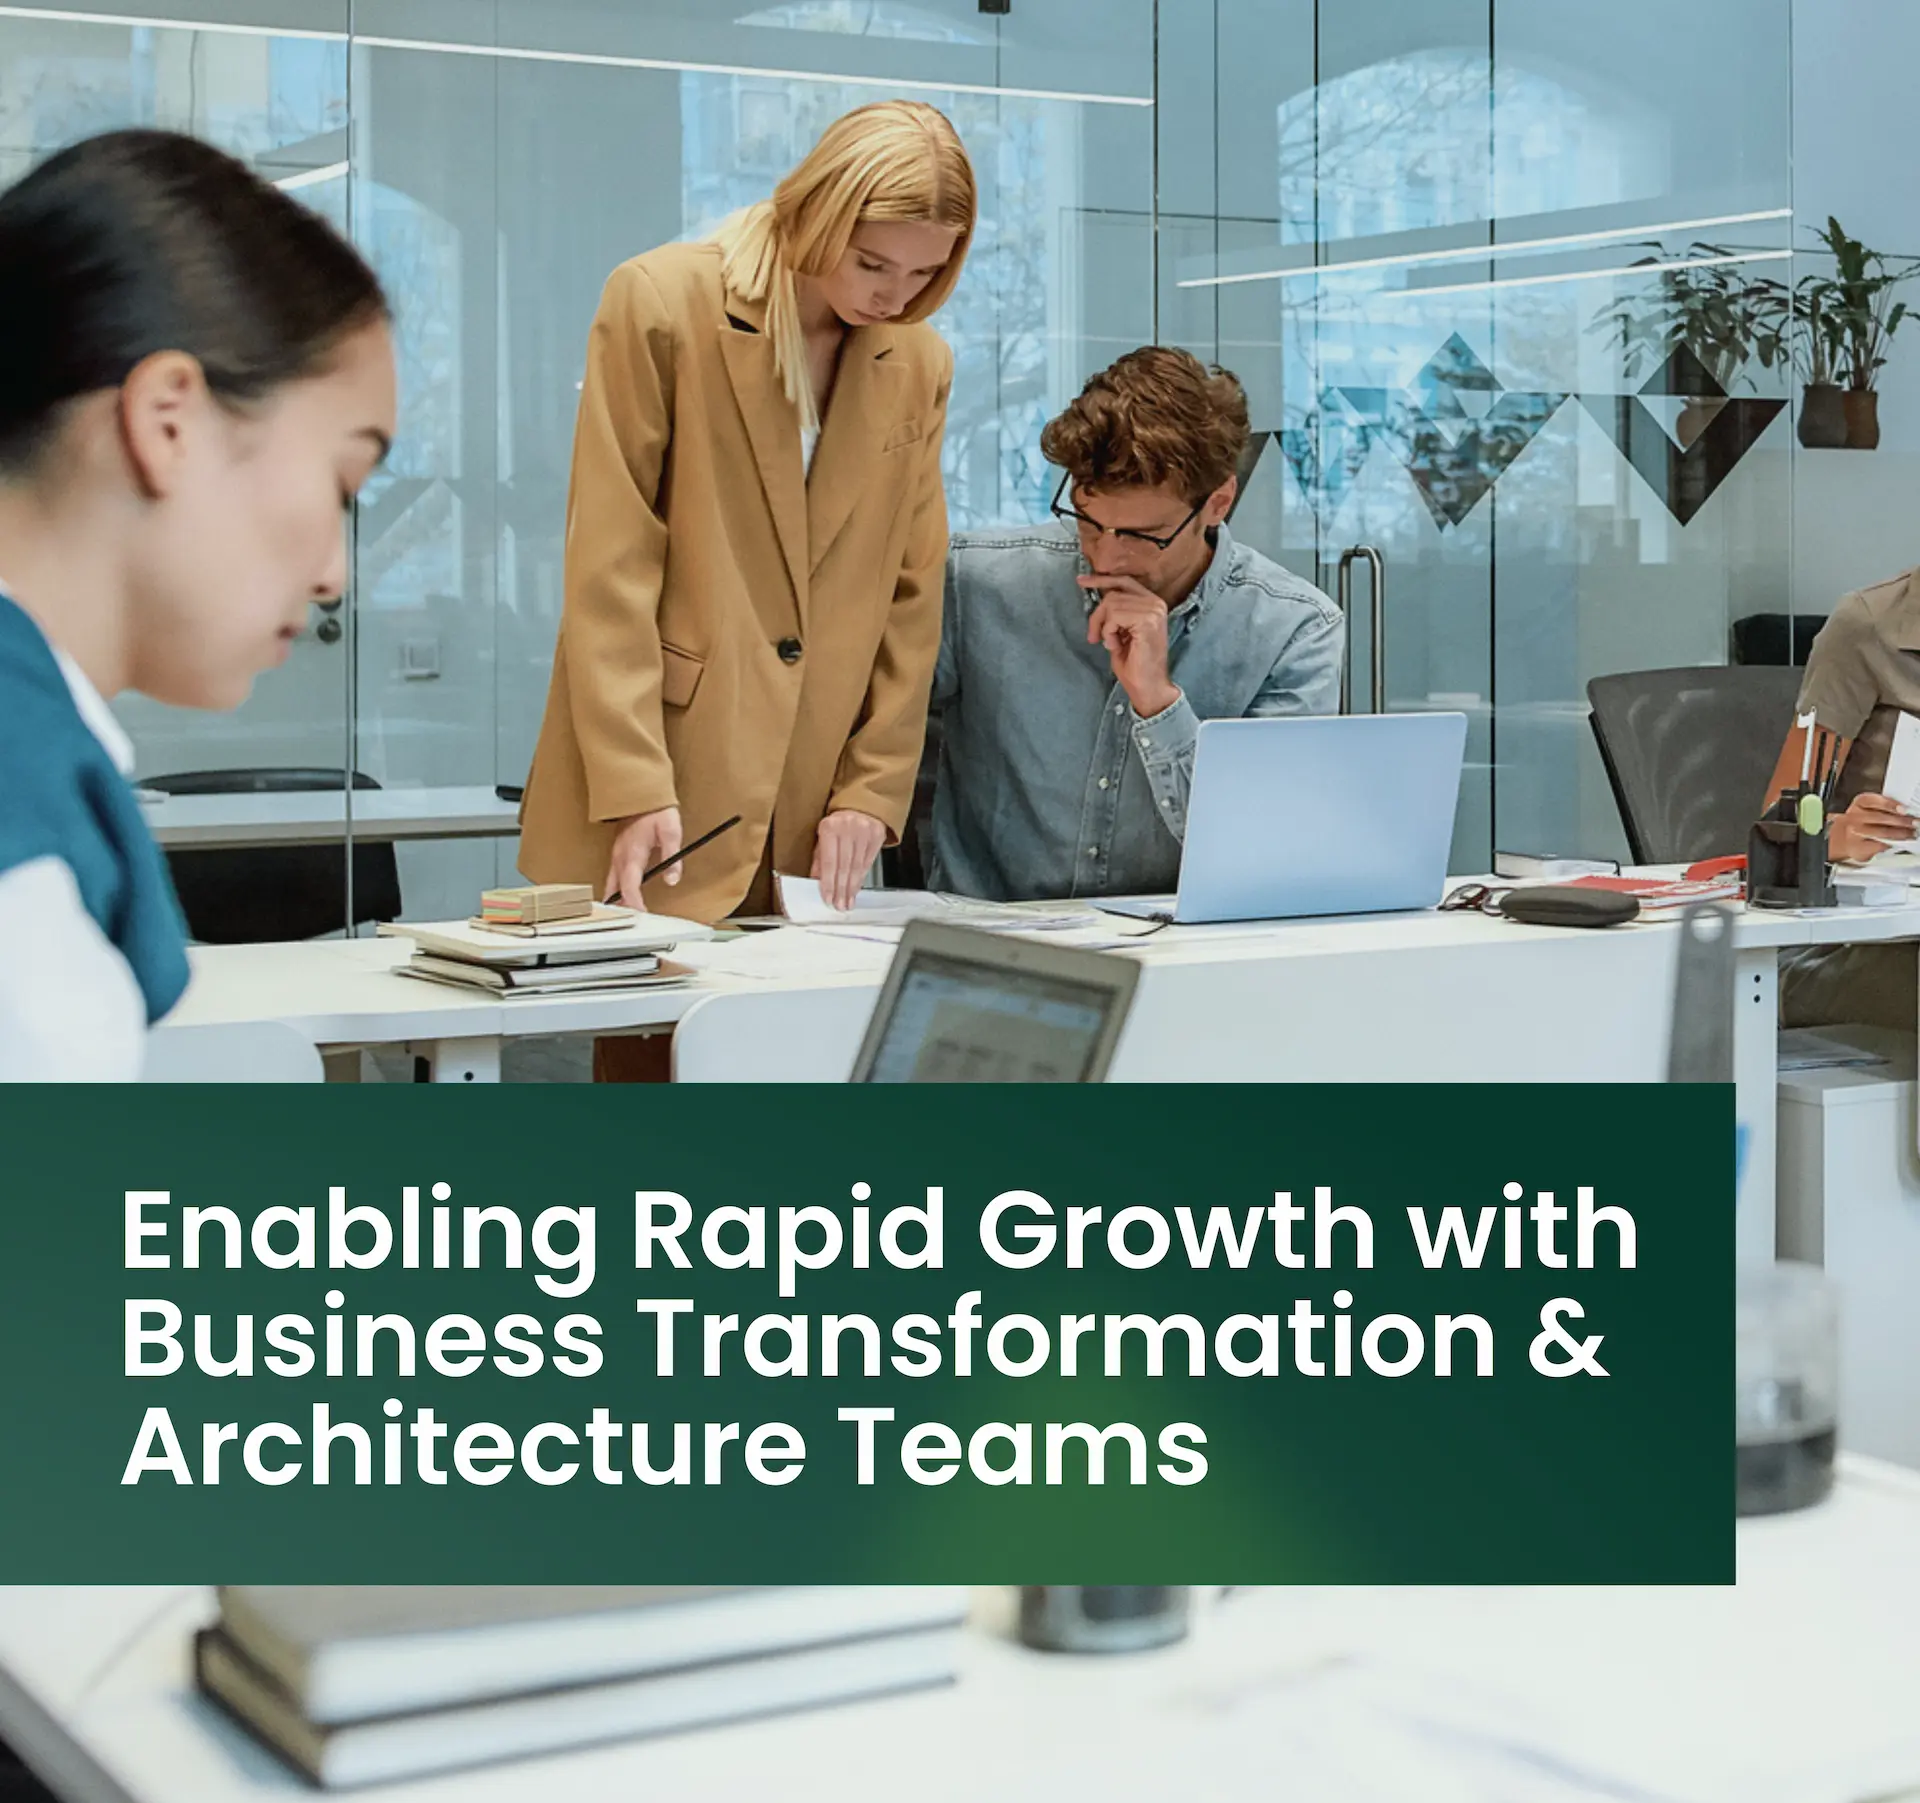 Enabling Rapid Growth with Business Transformation & Architecture Teams